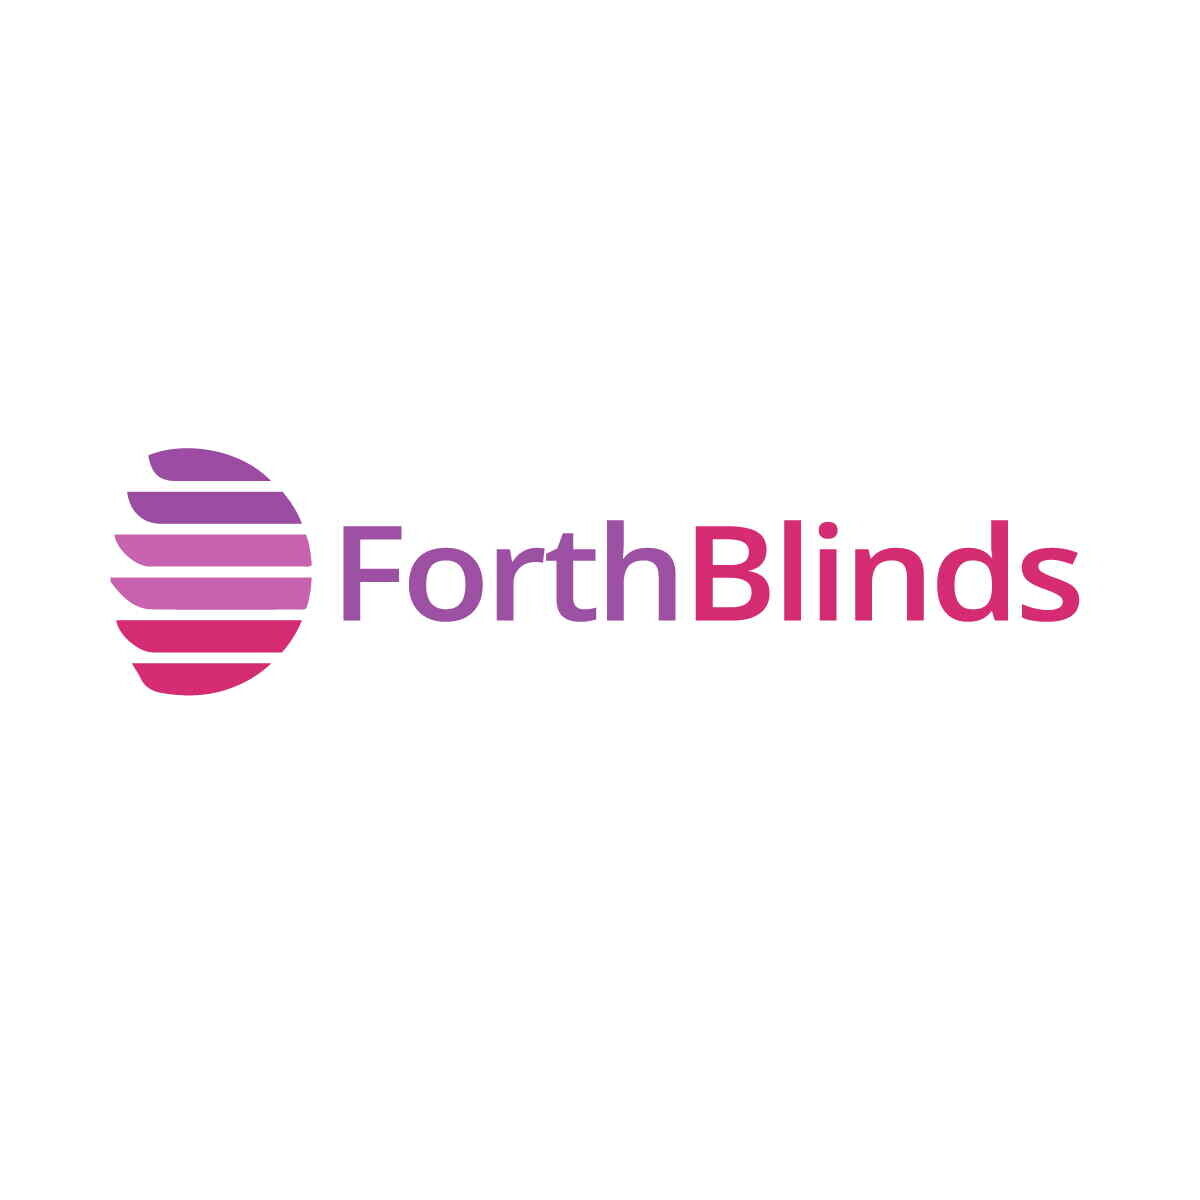 FORTH BLINDS